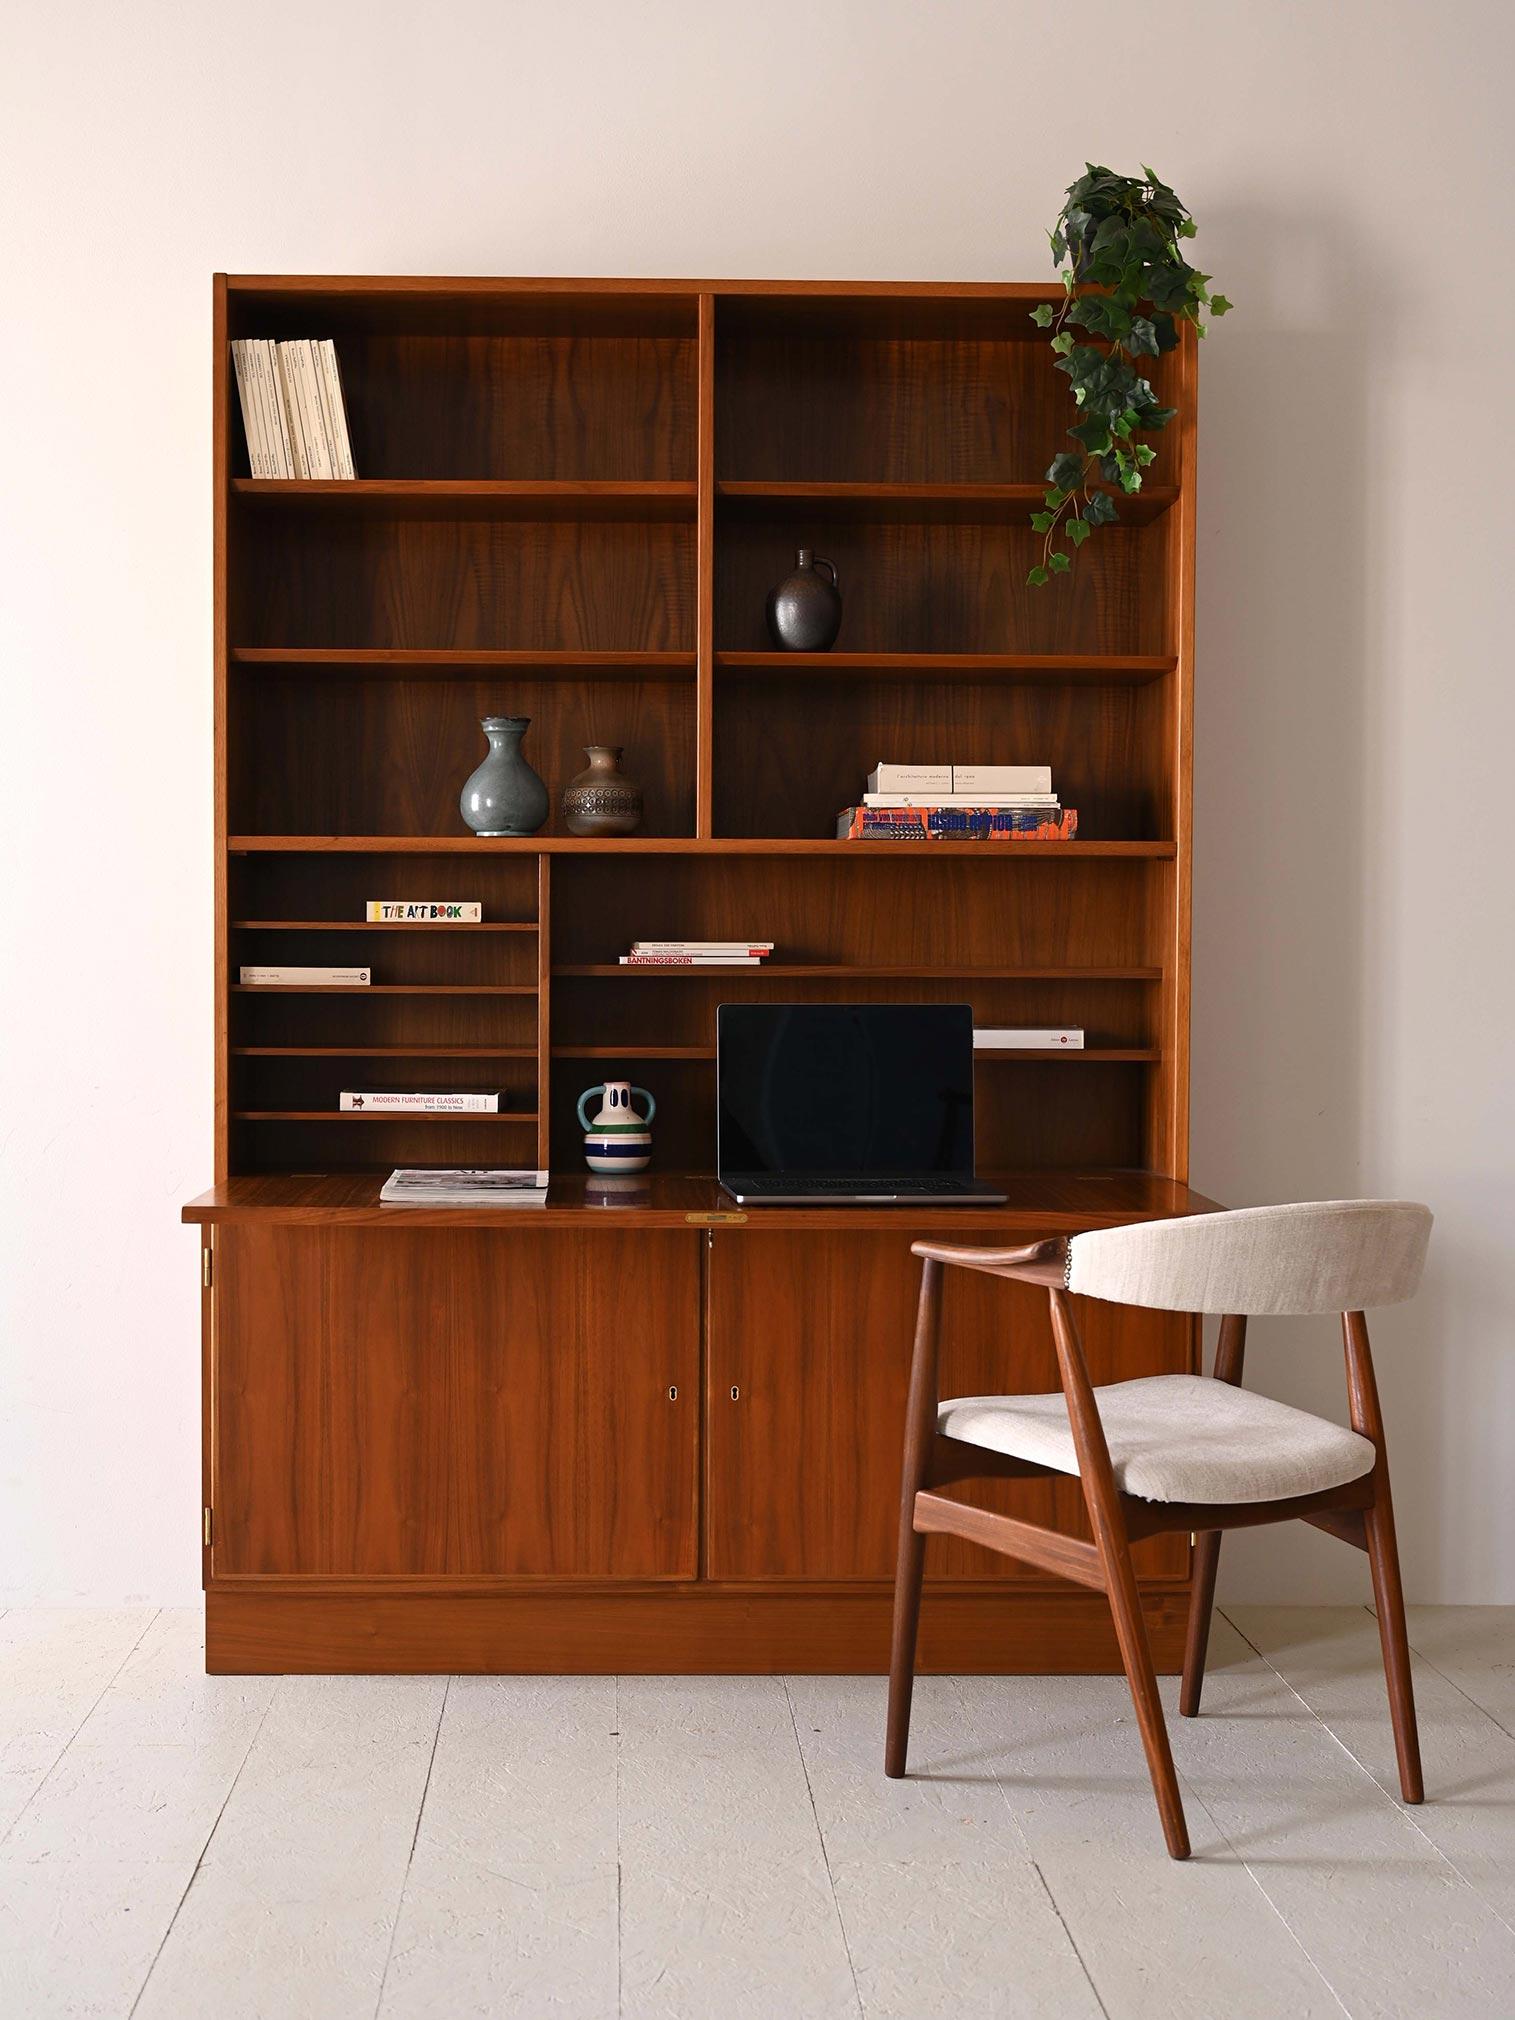 Vintage 1960s cabinet with shelving and storage compartment.

This Scandinavian bookcase with drop-down door is a perfect example of Scandinavian design that aims to combine aesthetics and functionality. The top of the cabinet features open shelving